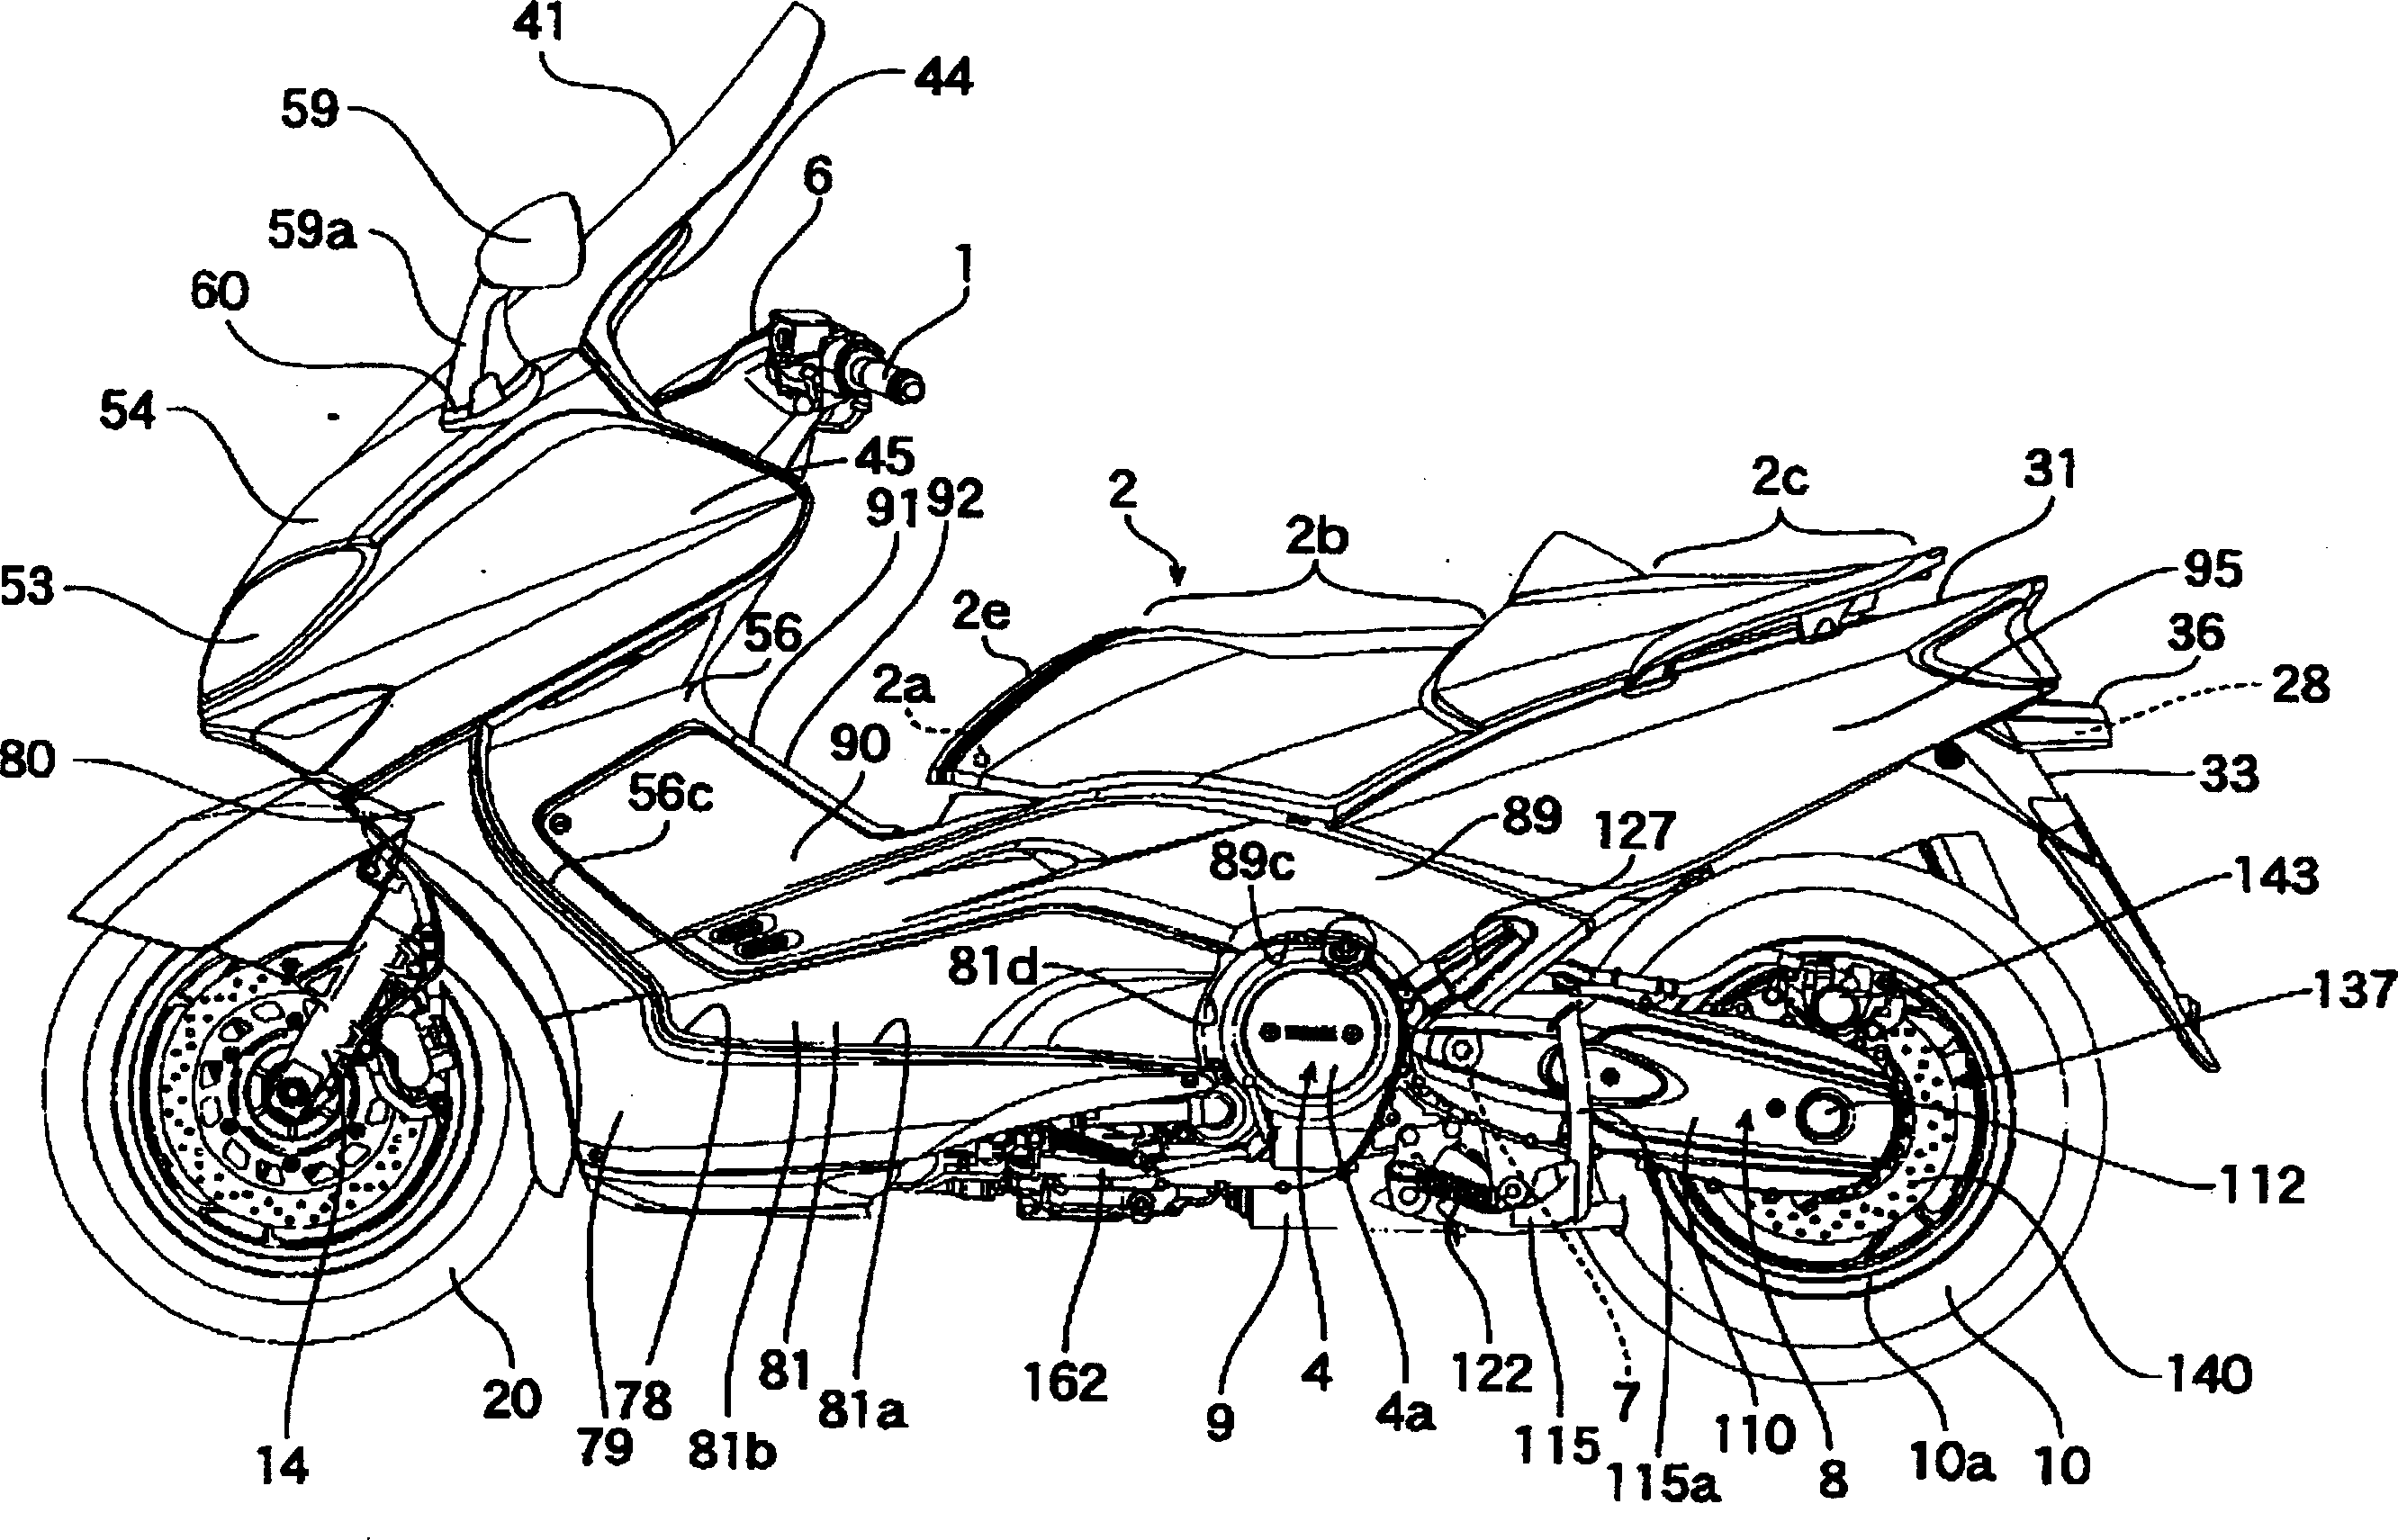 Outer mounting structure of light motorcycle